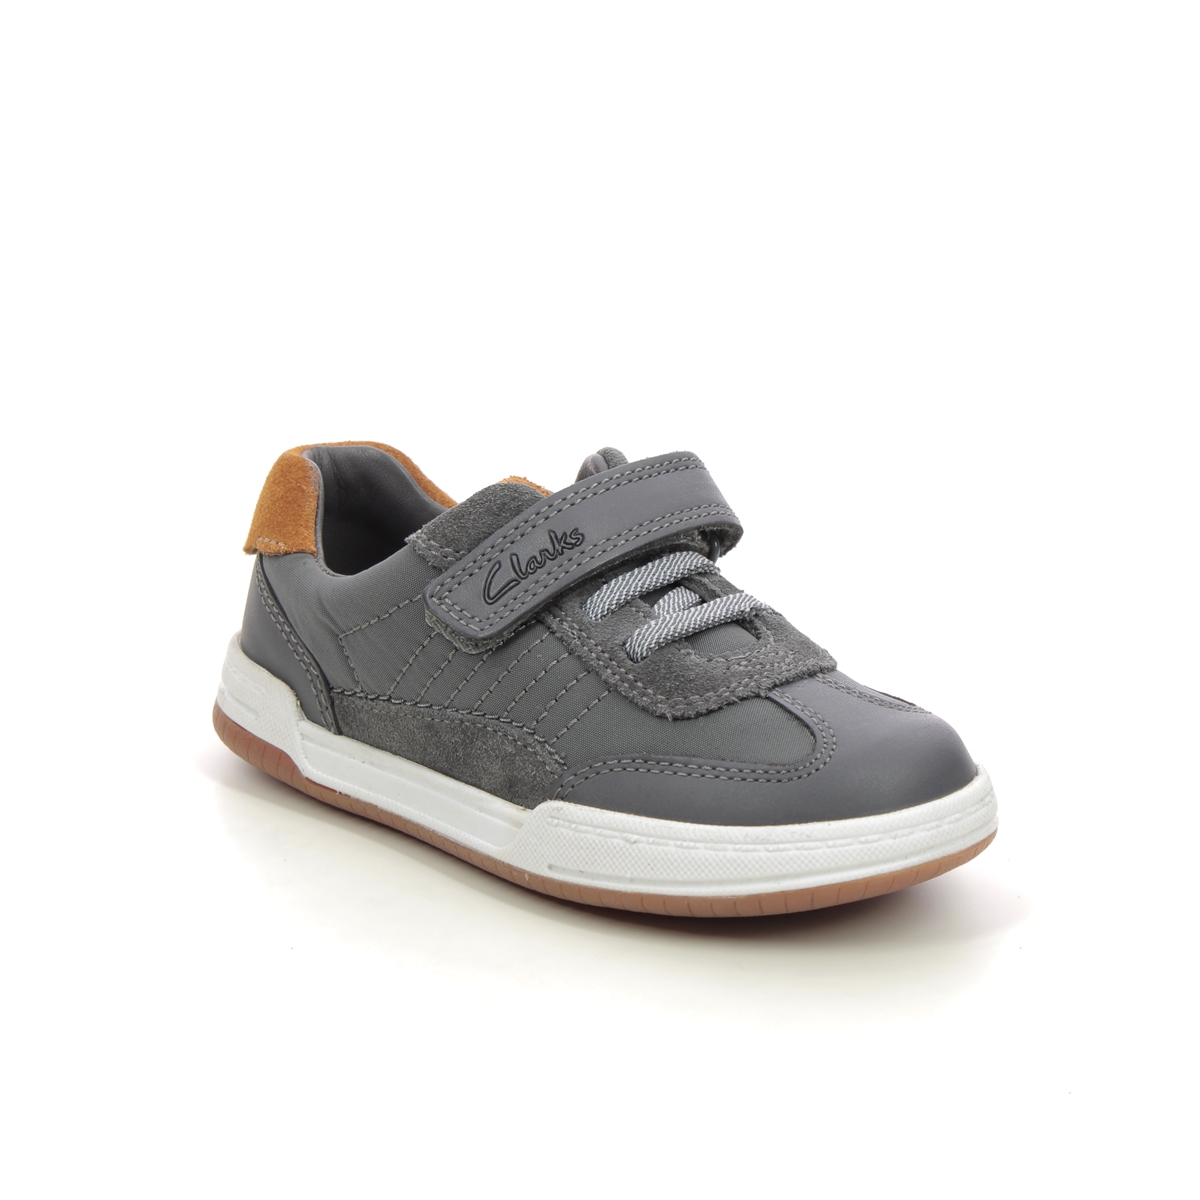 Clarks Fawn Family K Grey Leather Kids Boys Toddler Shoes 751156F In Size 8.5 In Plain Grey Leather F Width Fitting Regular Fit For kids